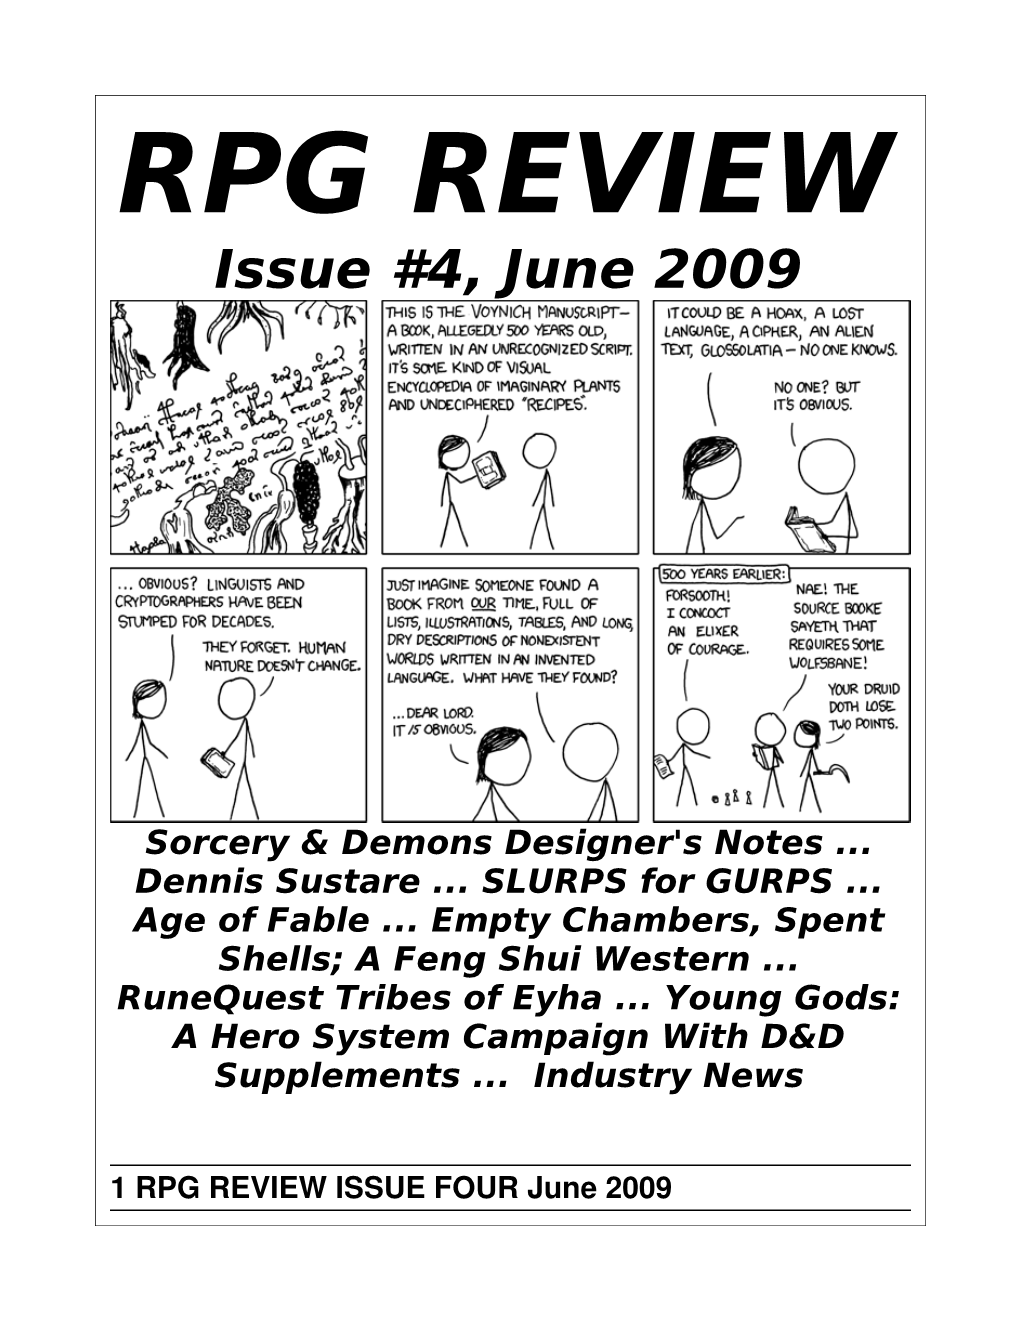 RPG Review Issue 4, June 2009